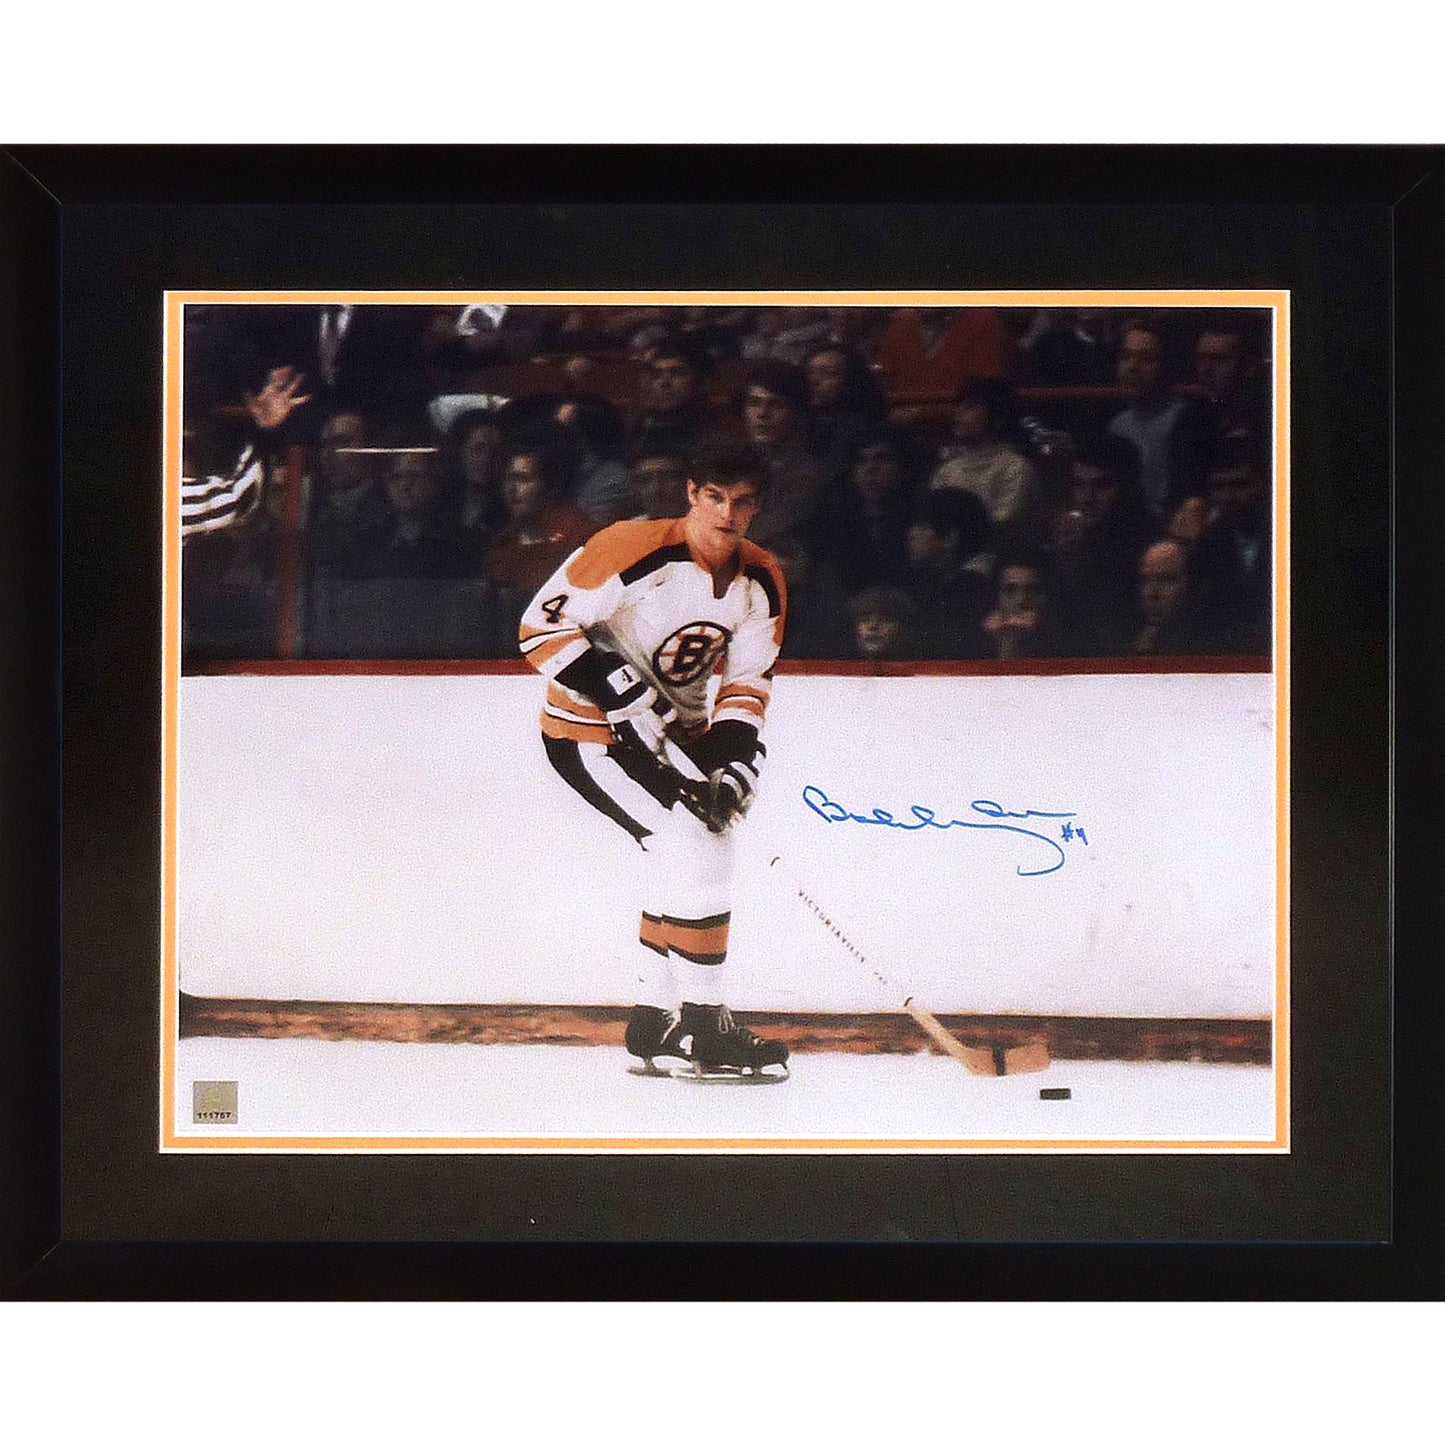 Bobby Orr Autographed Boston Bruins (Action) Deluxe Framed 16x20 Photo - GRN Holo